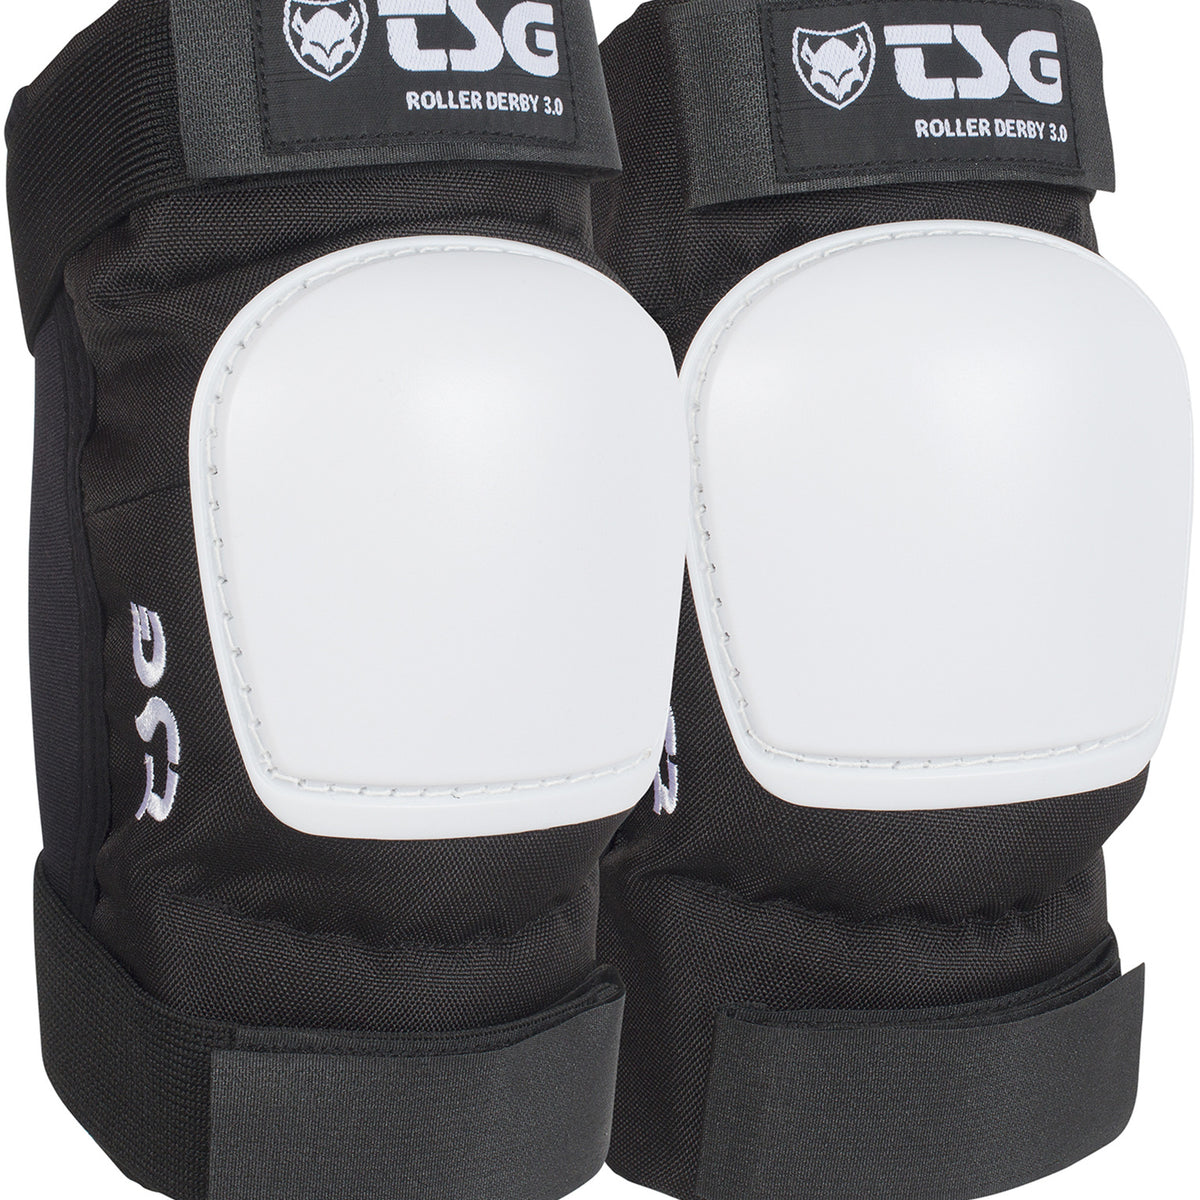 Skate and Derby Knee Pads: Lowest Prices Guaranteed!